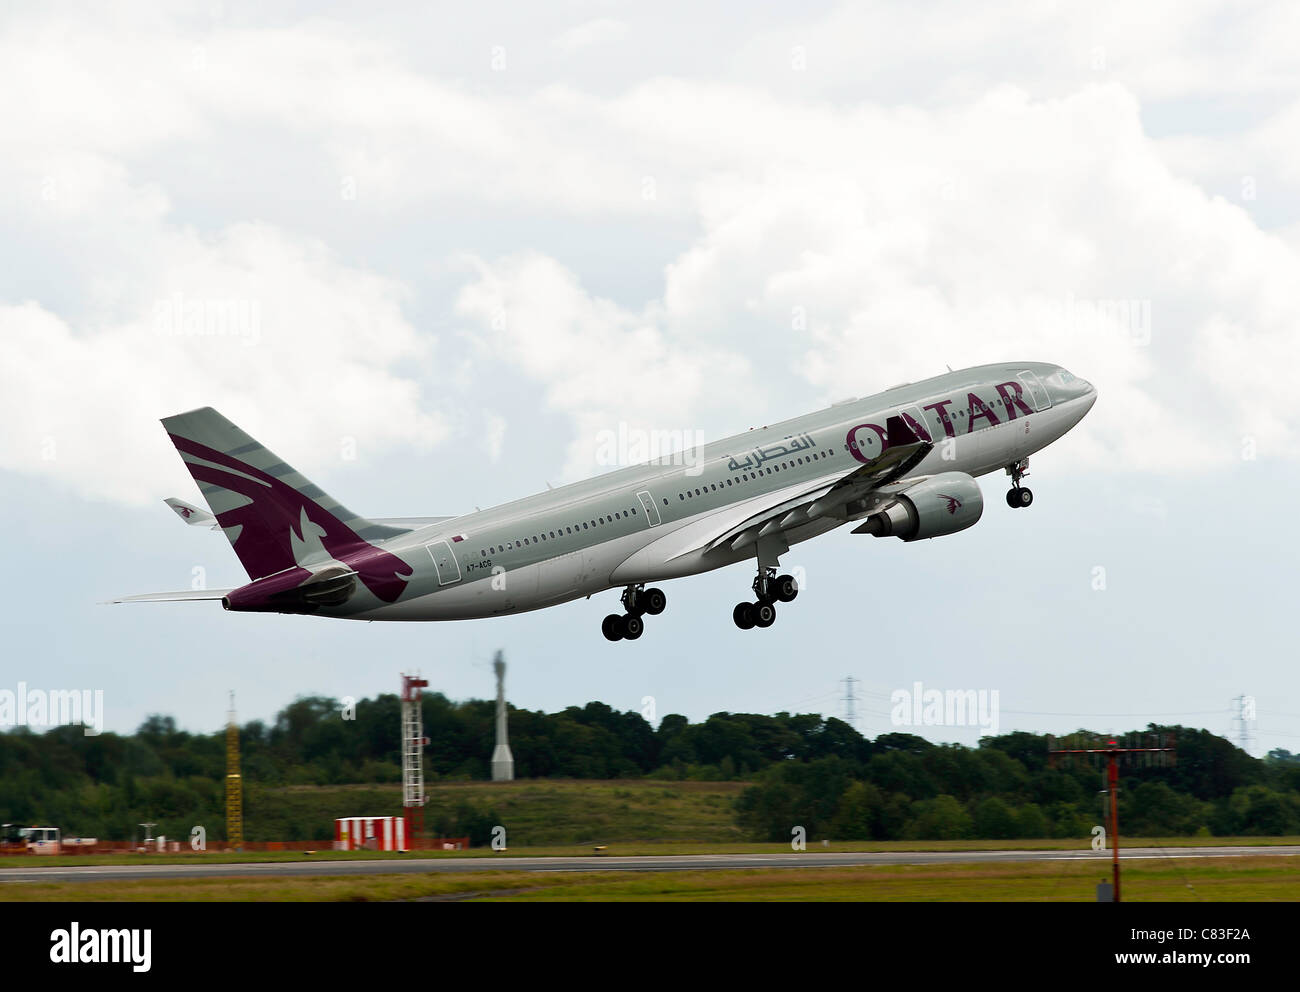 Qatar Airways Airbus A330-202 Airliner A7-ACG Taking Off for Doha From Manchester International Airport England United Kingdom Stock Photo